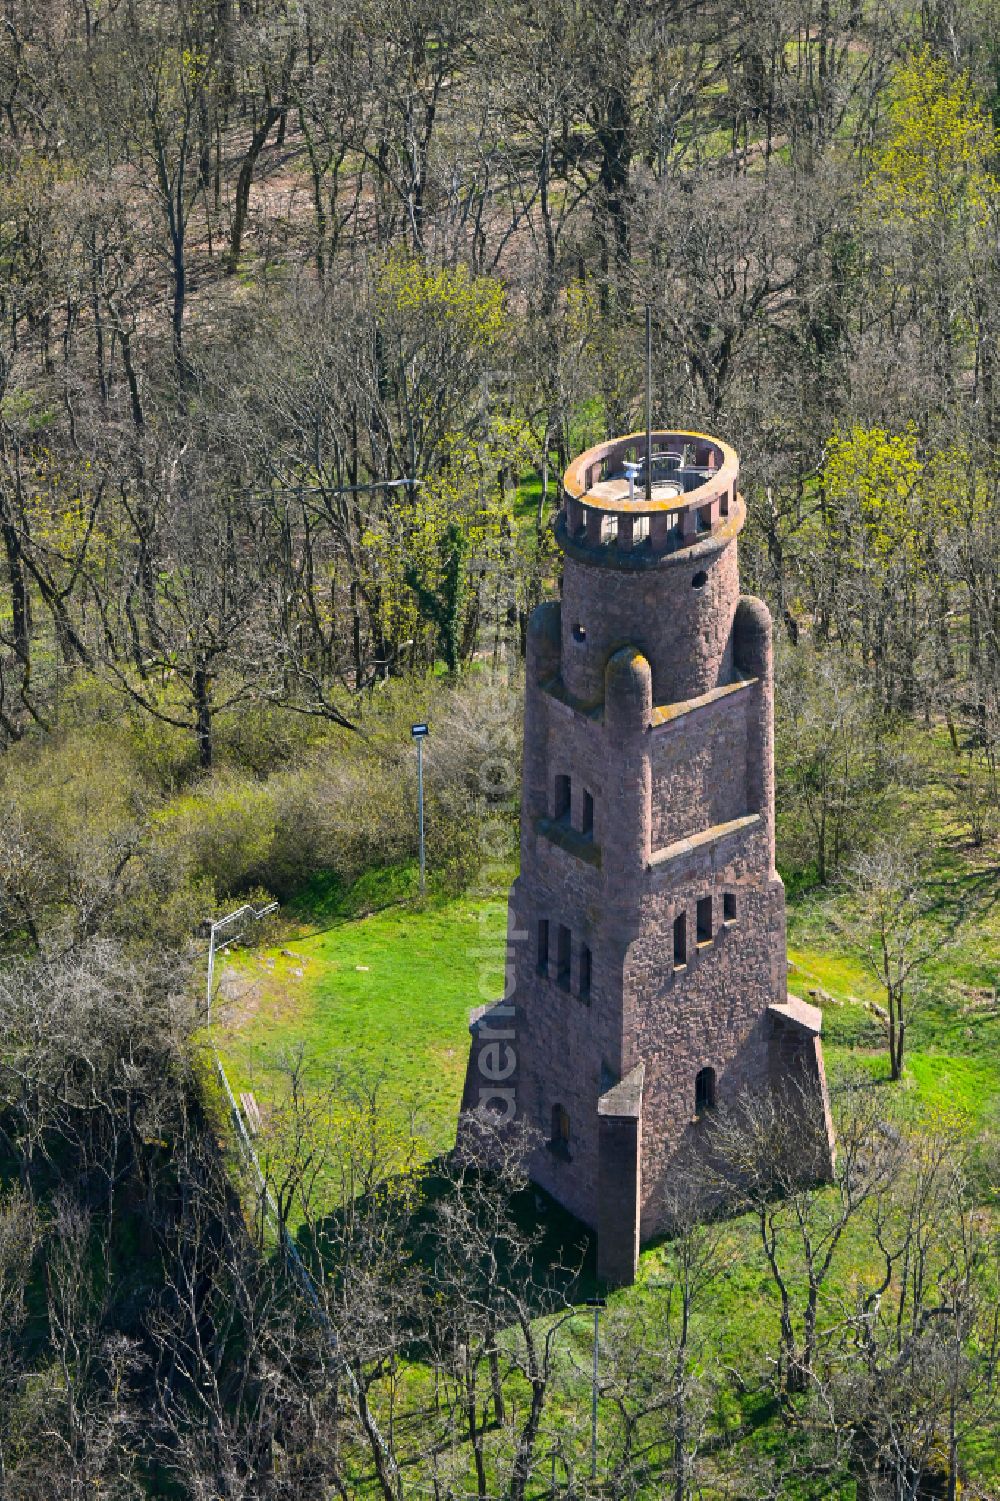 Wettin from the bird's eye view: Tower building of the Bismarck tower - observation tower on street Koennernsche Strasse in Wettin in the state Saxony-Anhalt, Germany